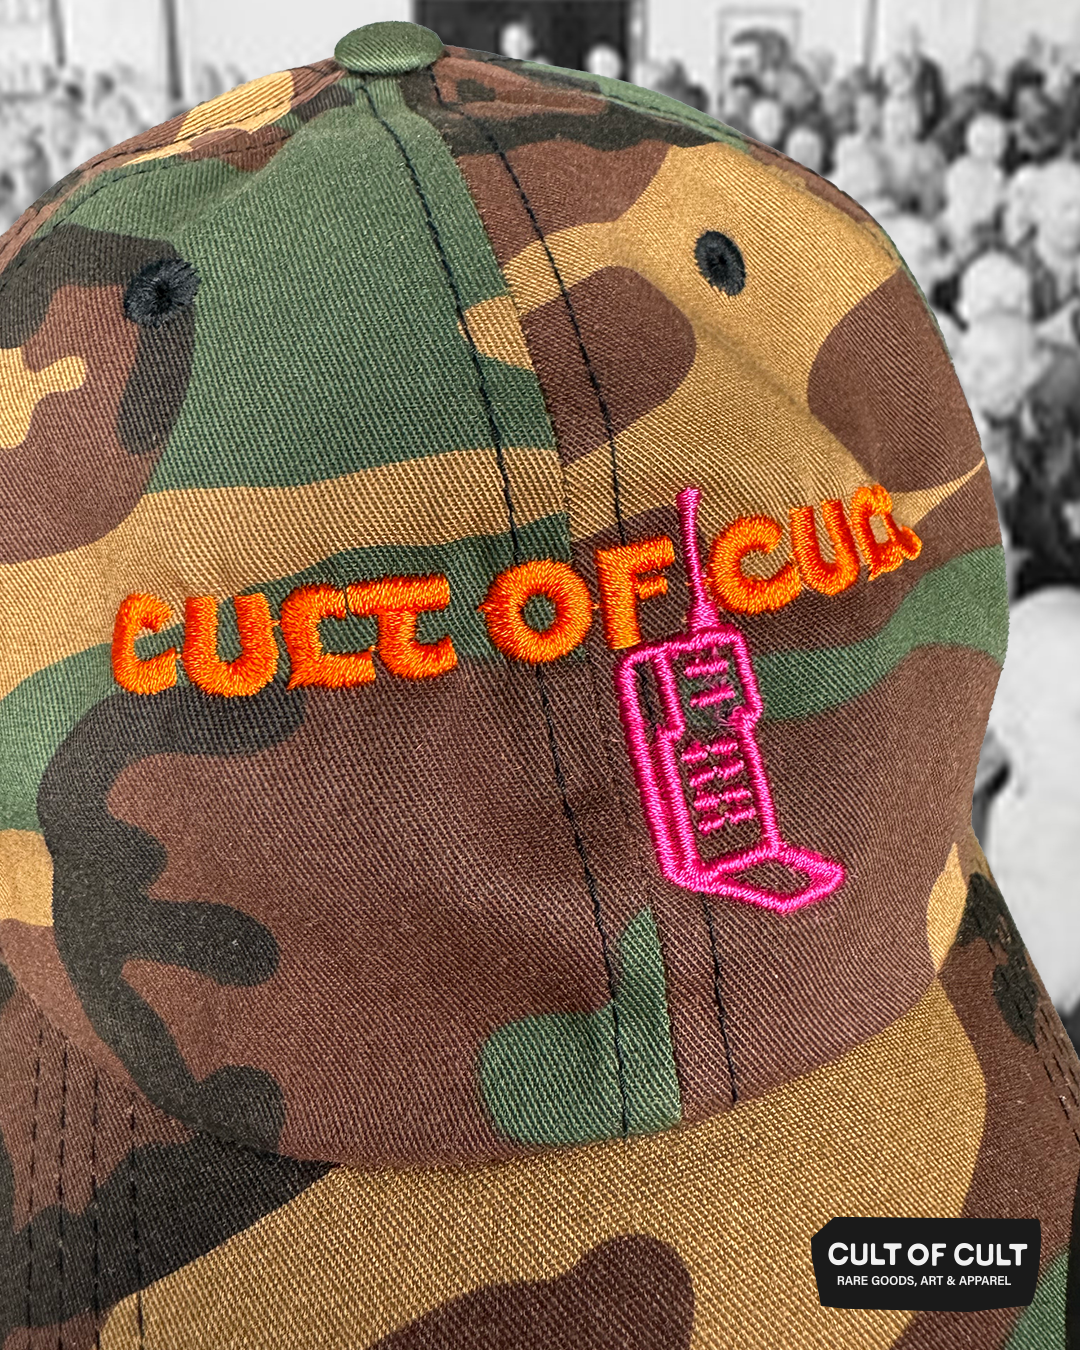 a close up detailed view of the camo Cult of Cult hat